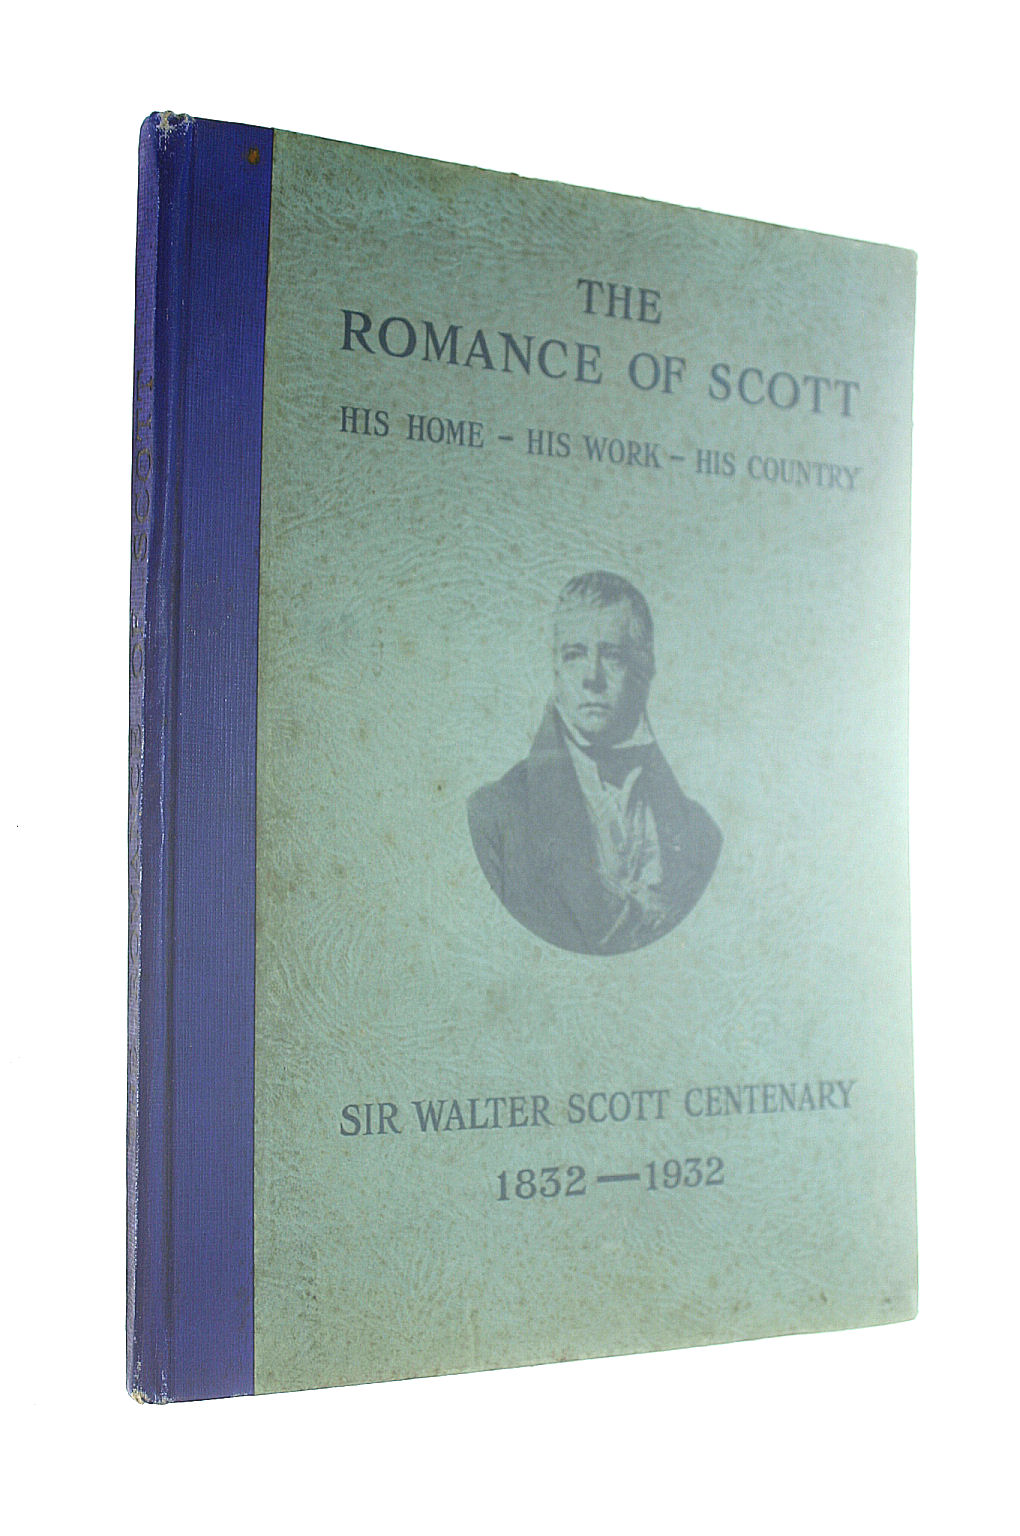 VARIOUS AUTHORS - The Romance of Scott: His Home, His Work, His Country